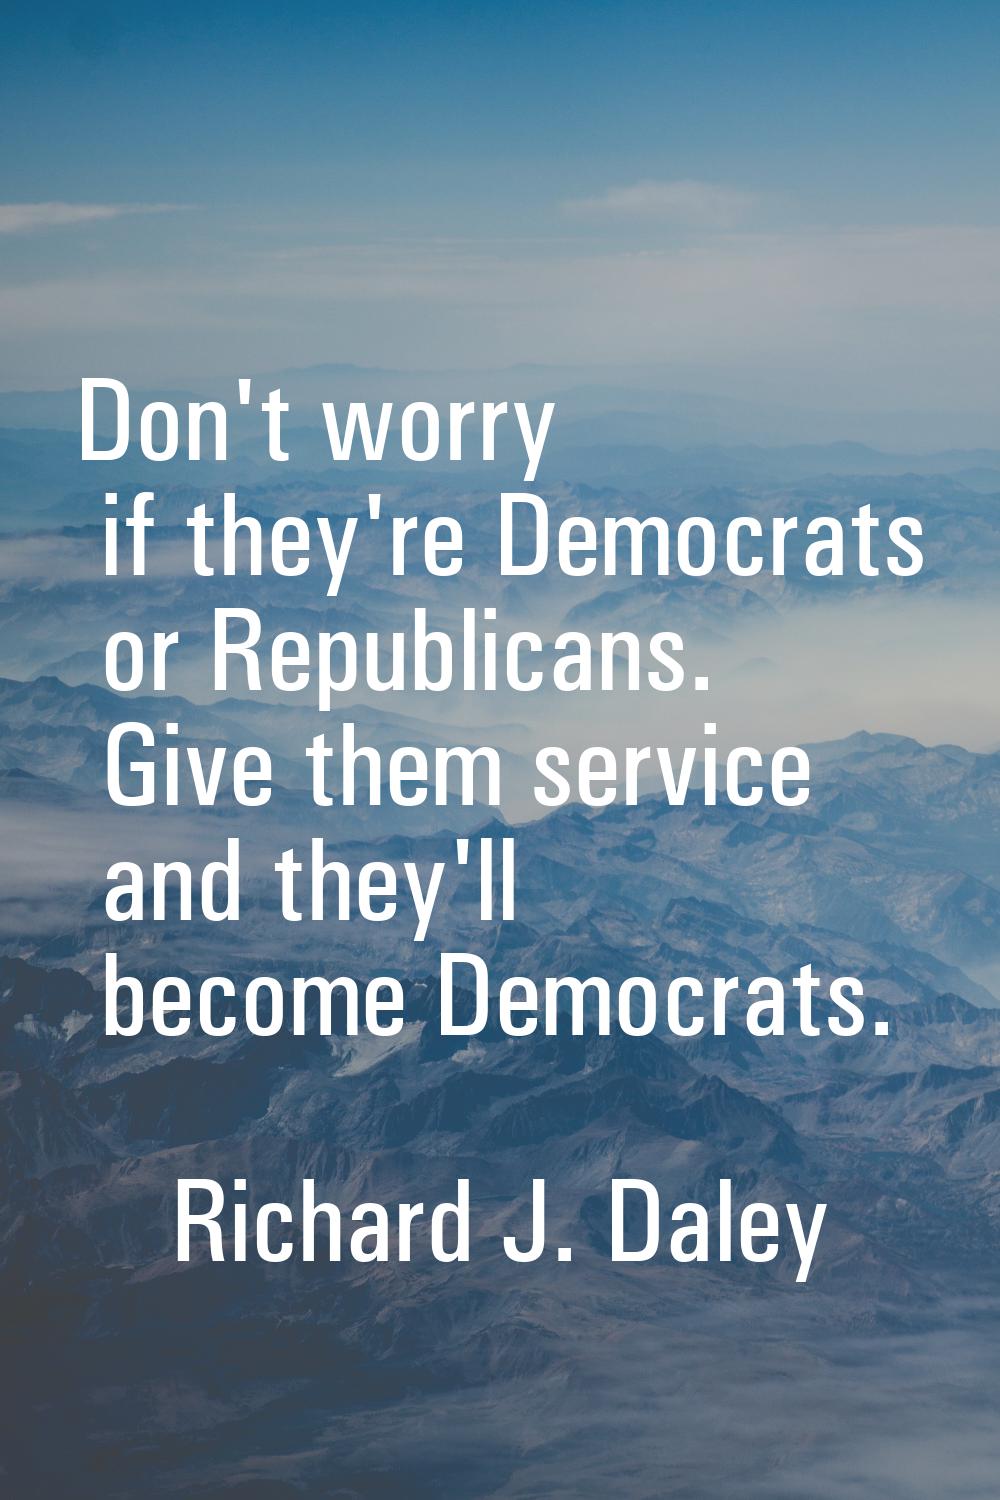 Don't worry if they're Democrats or Republicans. Give them service and they'll become Democrats.